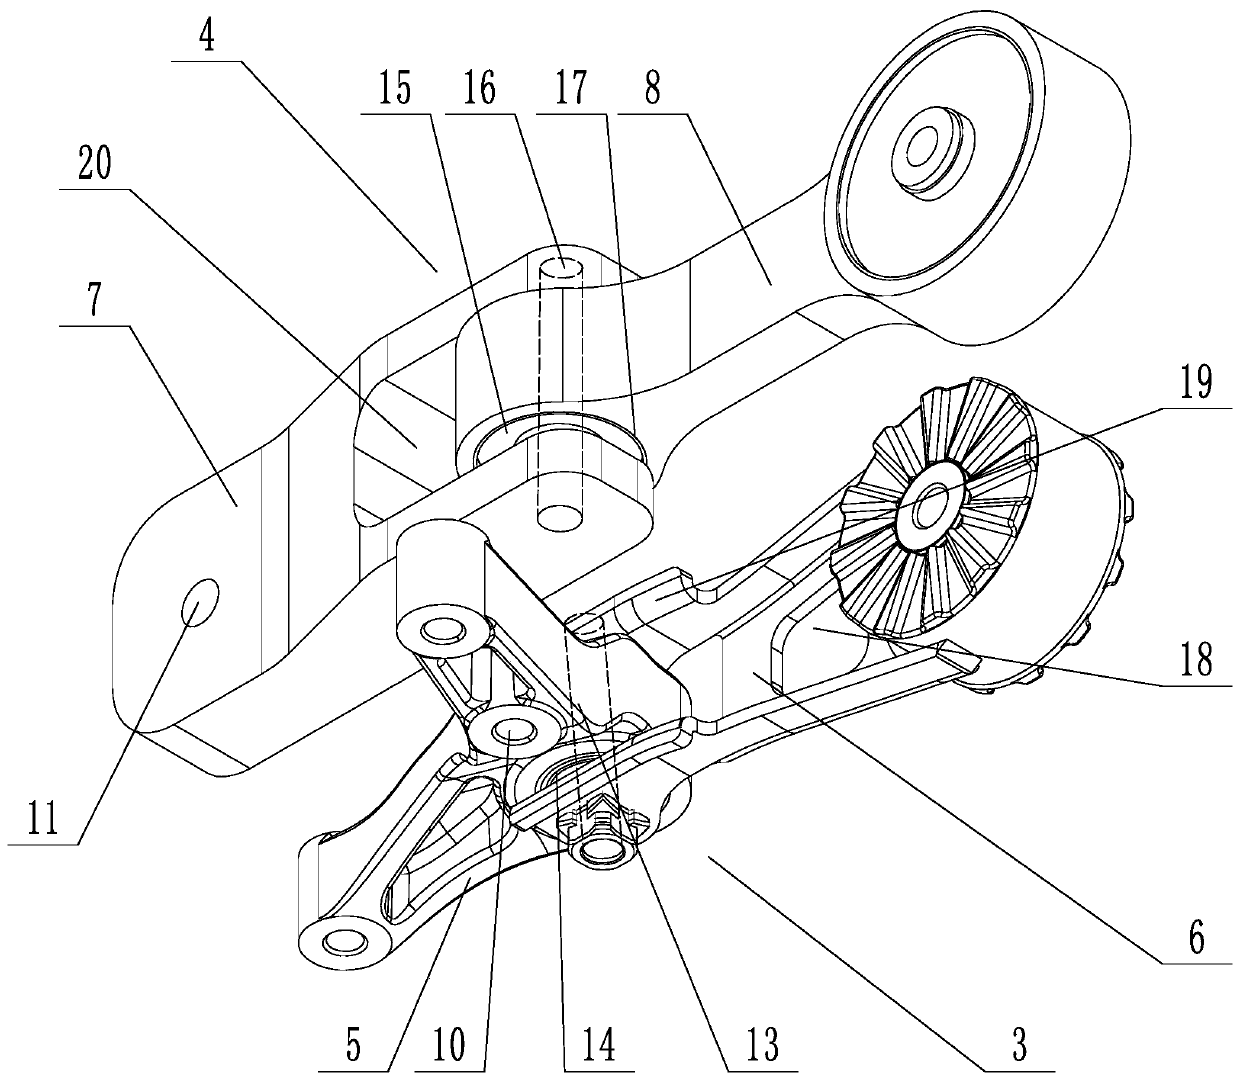 Rear suspension pull rod structure for connecting power assembly with front sub frame